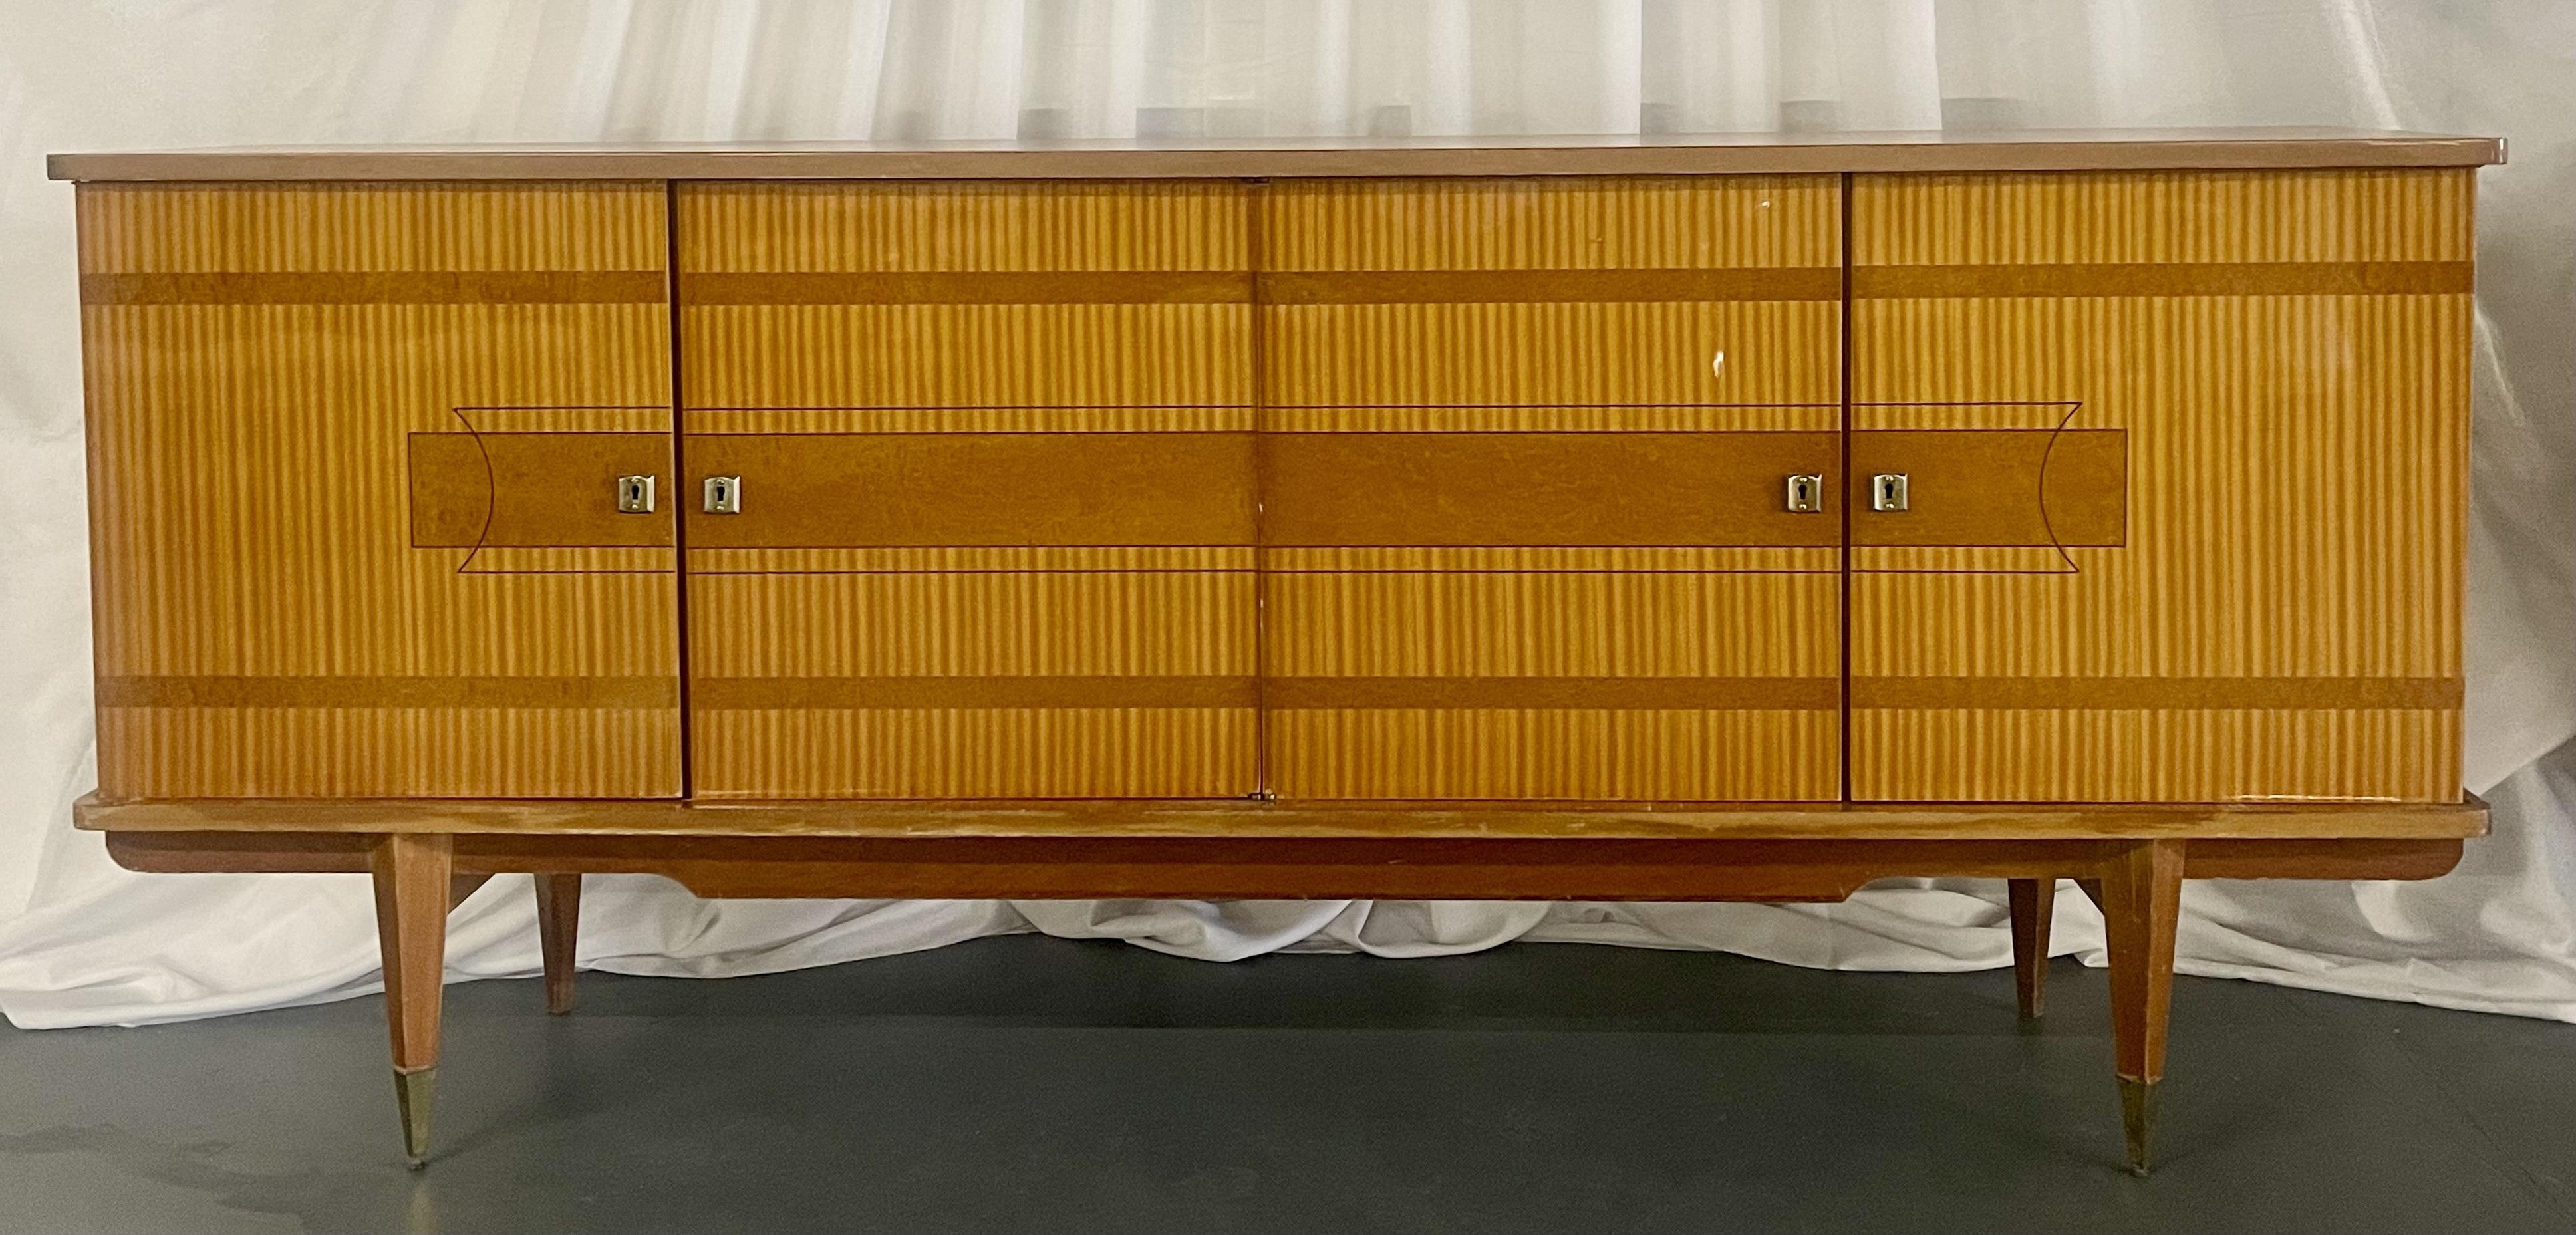 A French Cuban Mahogany Sideboard, Credenza or Buffet having four doors leading to a shelved finely fitted interior of sycamore. This large and impressive cabinet is simply stunning having long sleek tapering angled legs leading to an interior fully